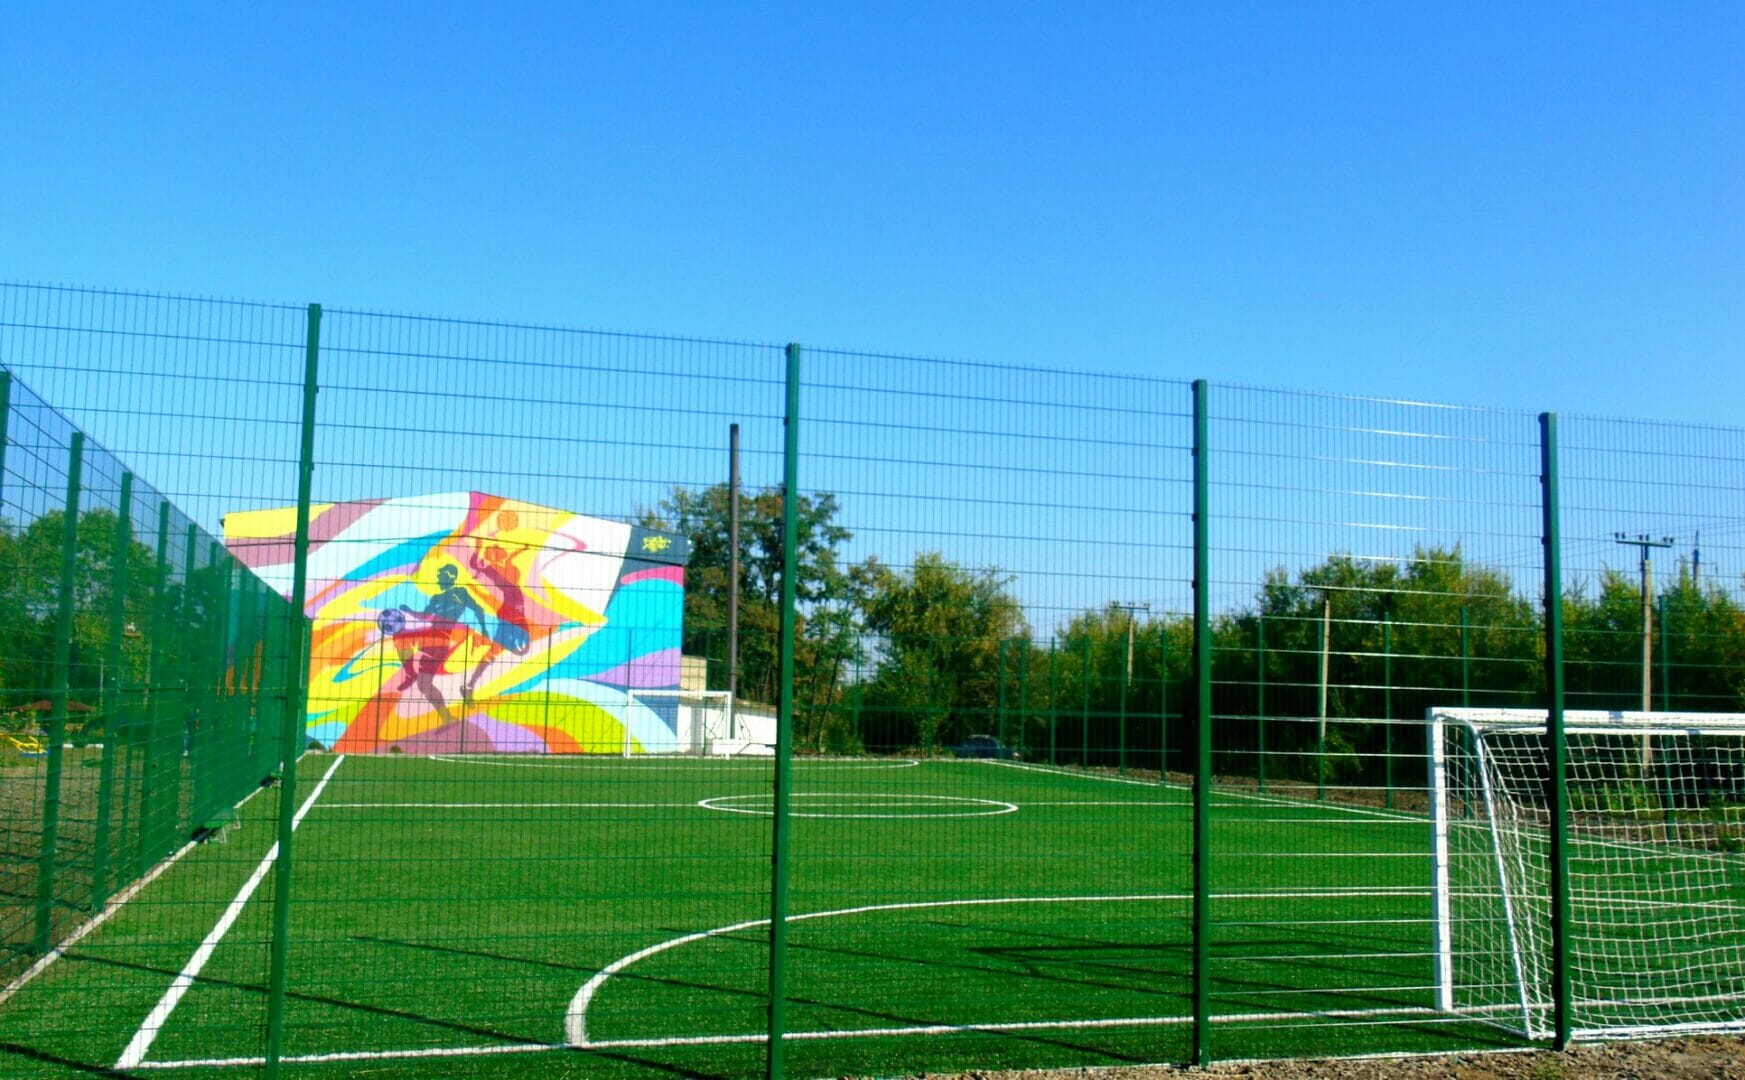  A mini-football pitch with artificial grass